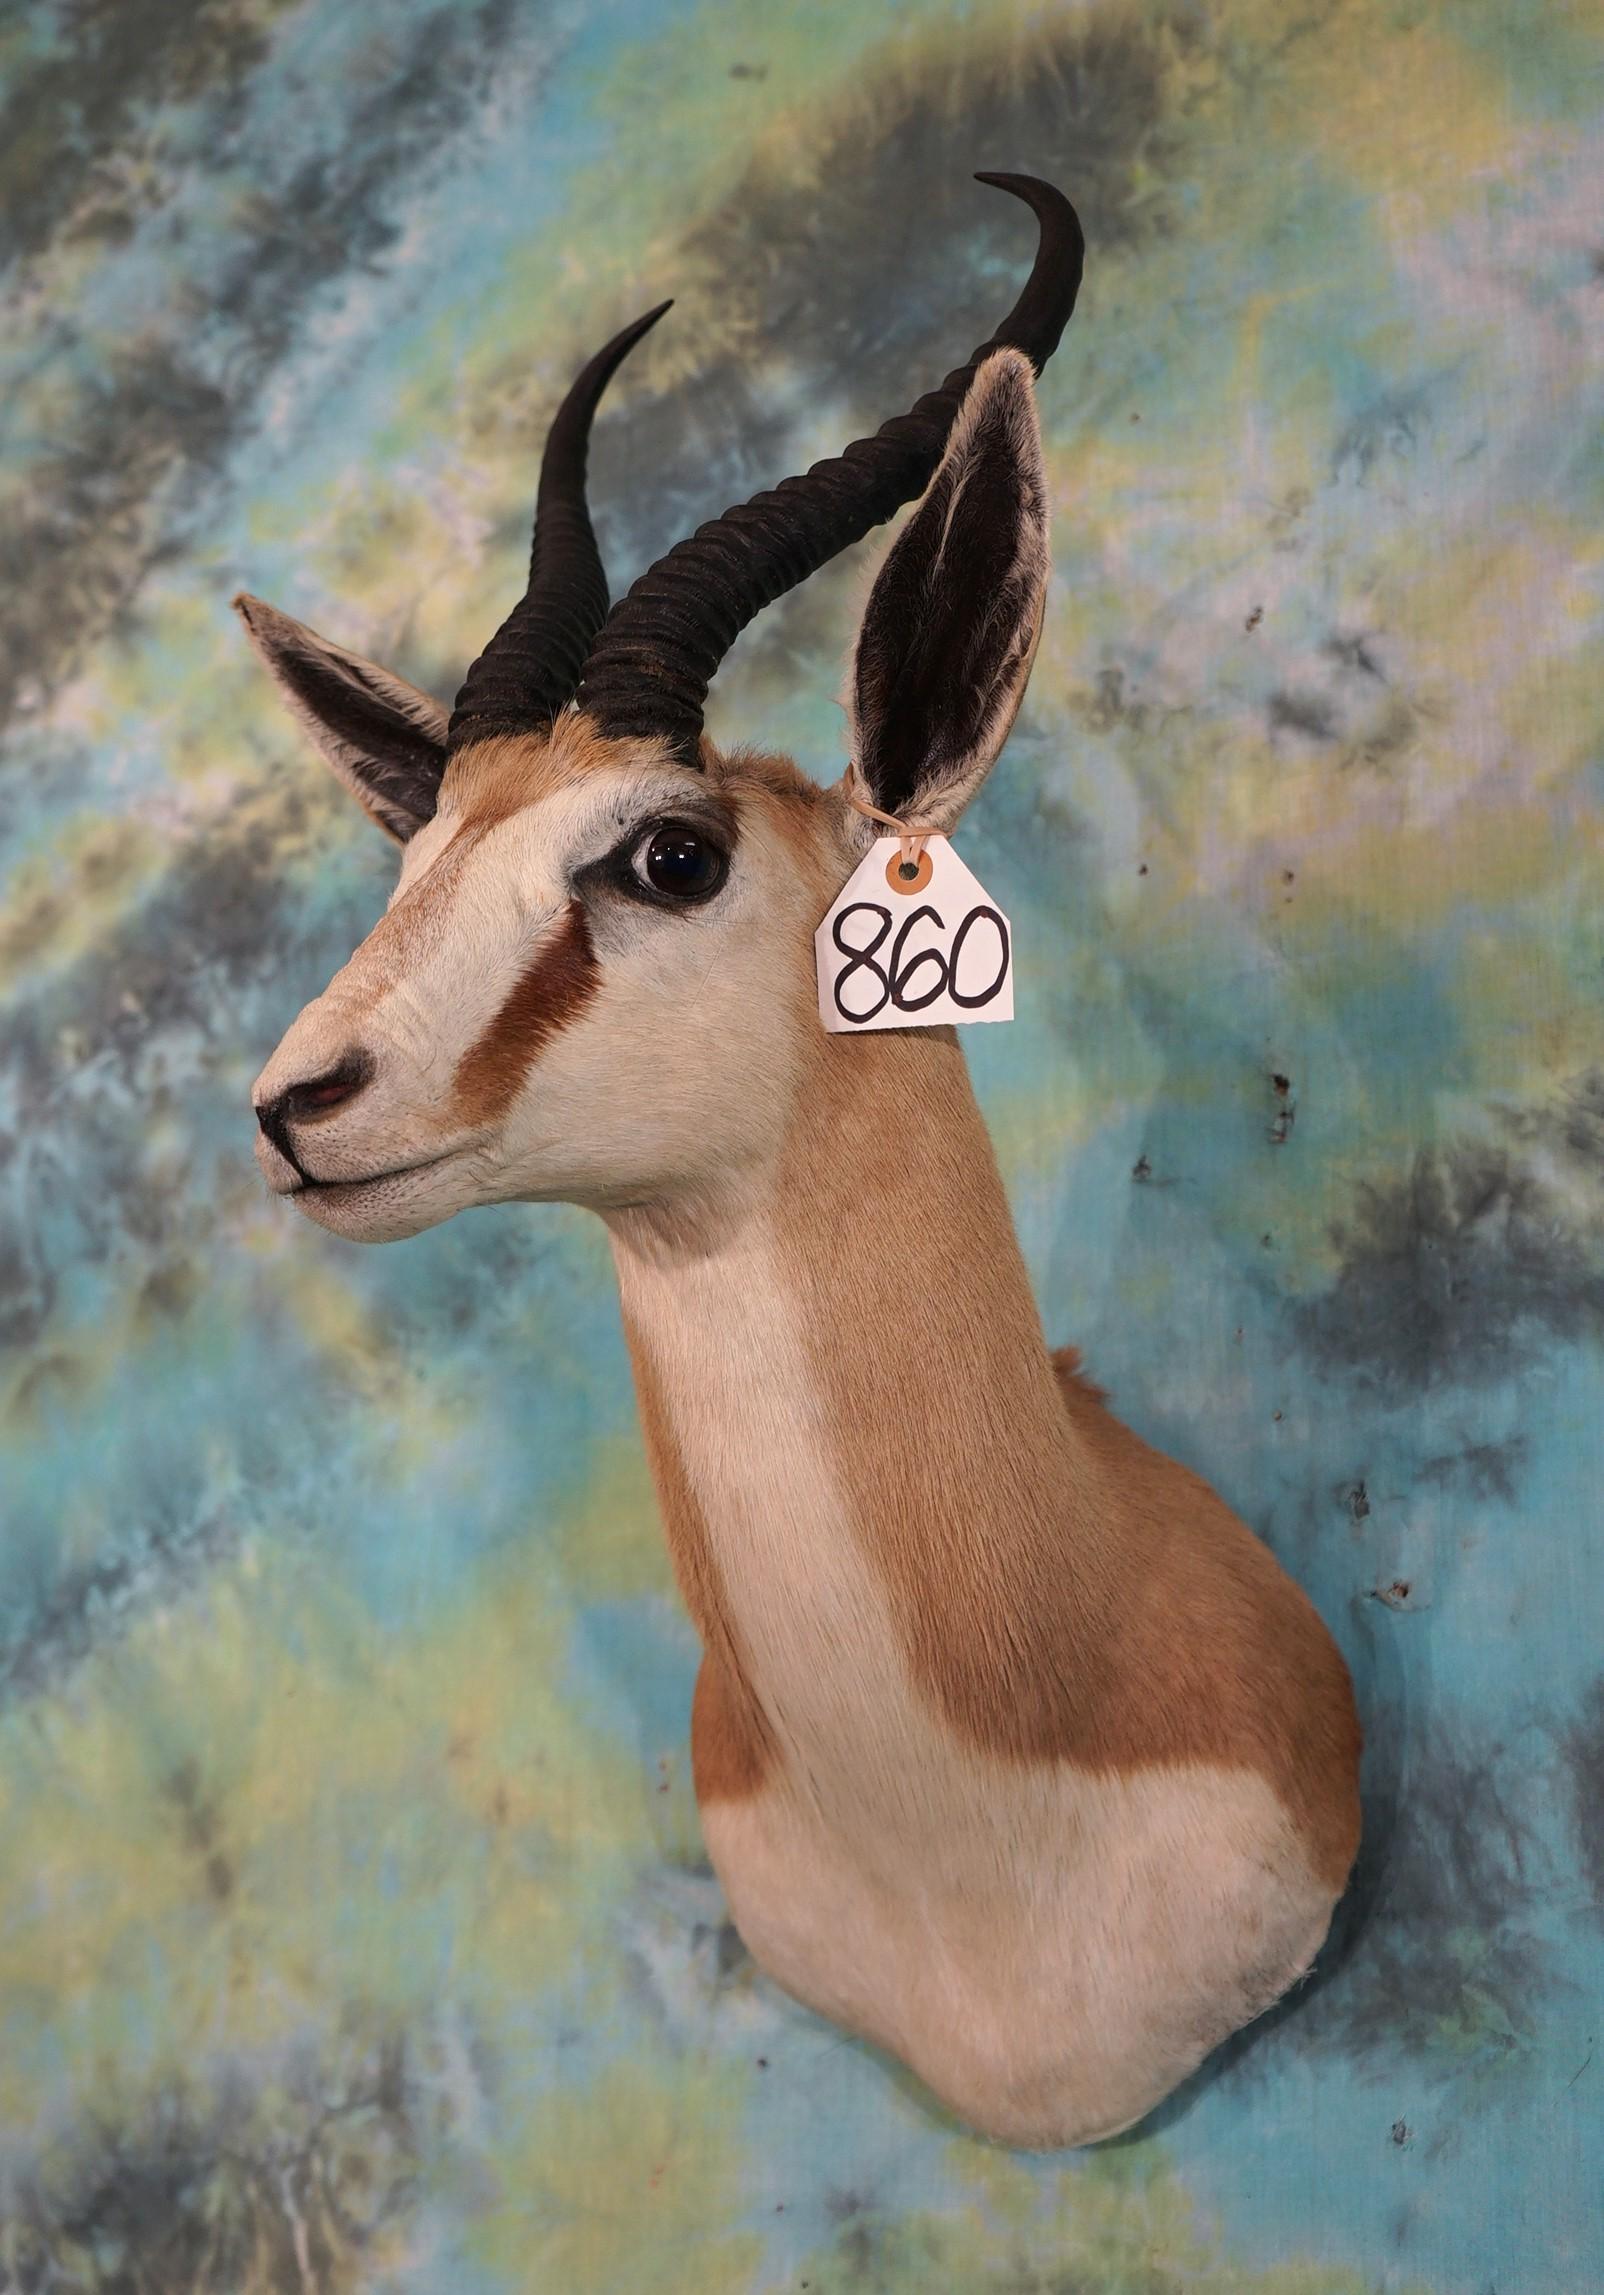 African Southern Common Springbuck Gazelle Shoulder Taxidermy Mount